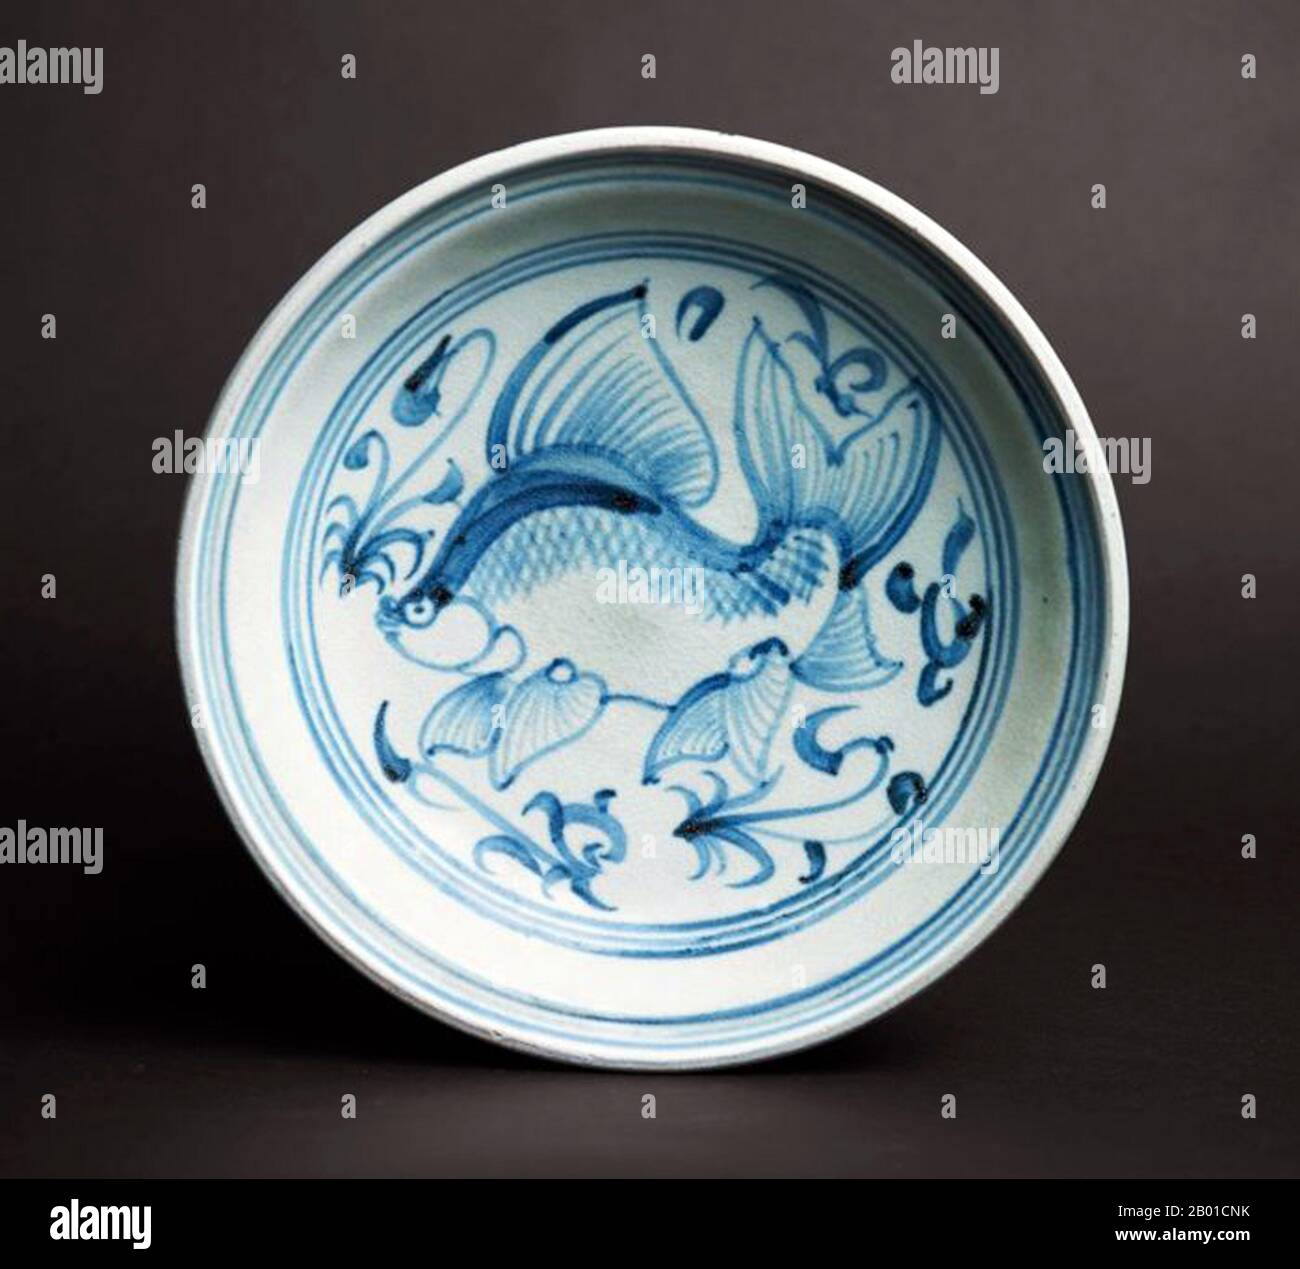 Vietnam: Blue and White Fish Plate with depiction of fish with extravagant fins swimming amongst water plants. Later Lê Dynasty (1533-1788).  Bát Tràng porcelain and pottery is a type of ceramics made in the village of Bát Tràng, in the suburban outskirts of the northern Vietnamese city of Hanoi. The village is located in an area rich in clay suitable for making fine ceramics.  Bát Tràng ceramics are considered some of the best known porcelain products in Vietnam besides those of Chu Đậu, Đồng Nai, Phu Lang, and Ninh Thuận. Stock Photo